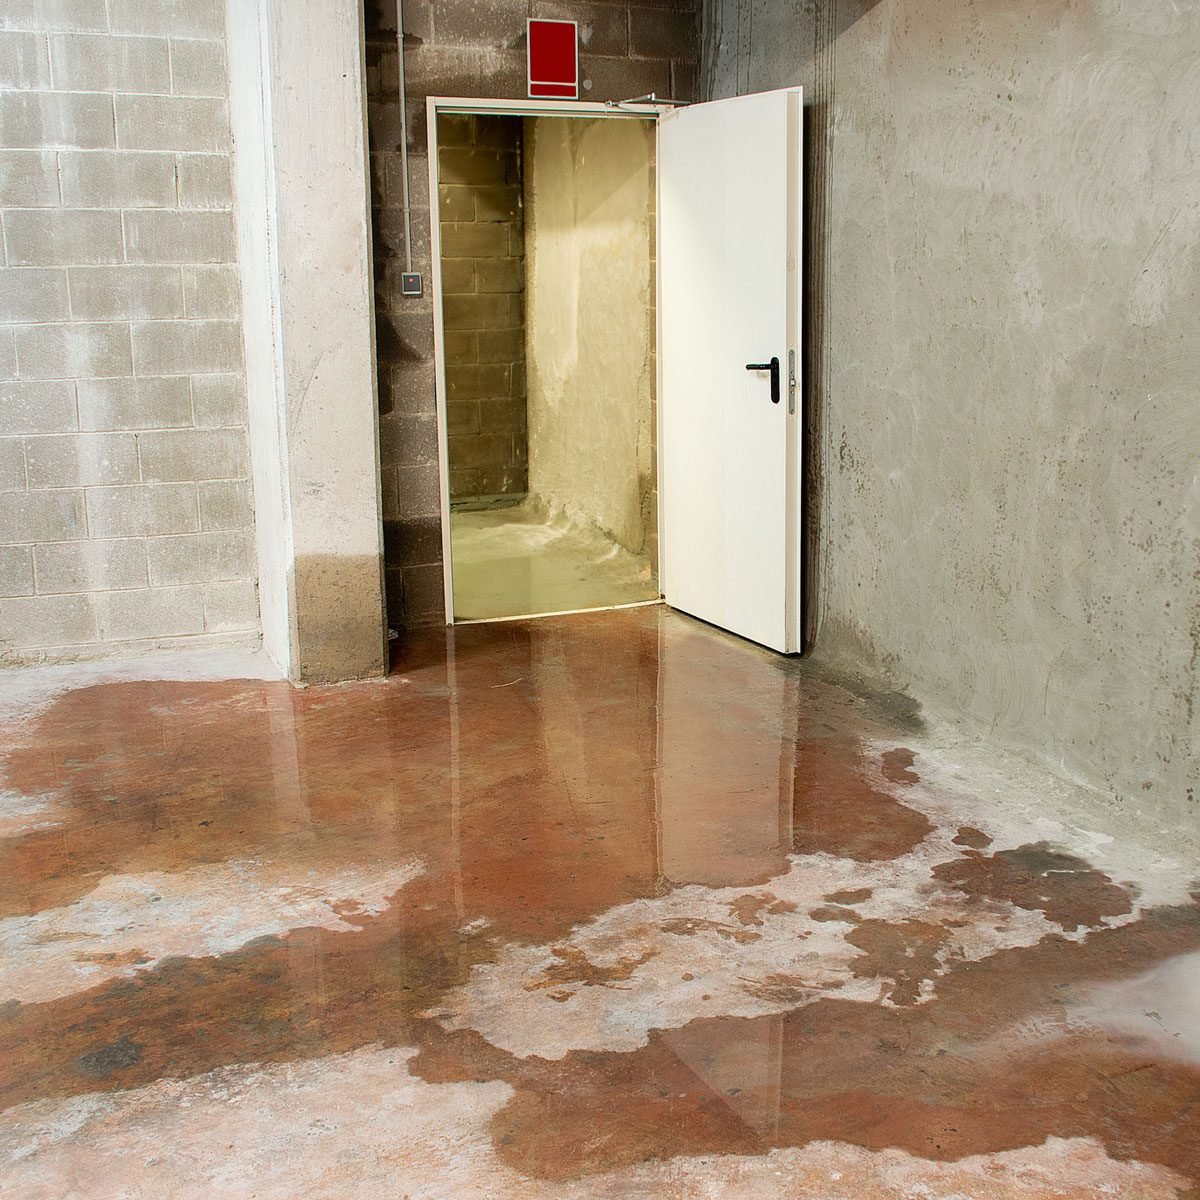 How To Prevent a Wet Basement by Fixing Your Home's Drainage